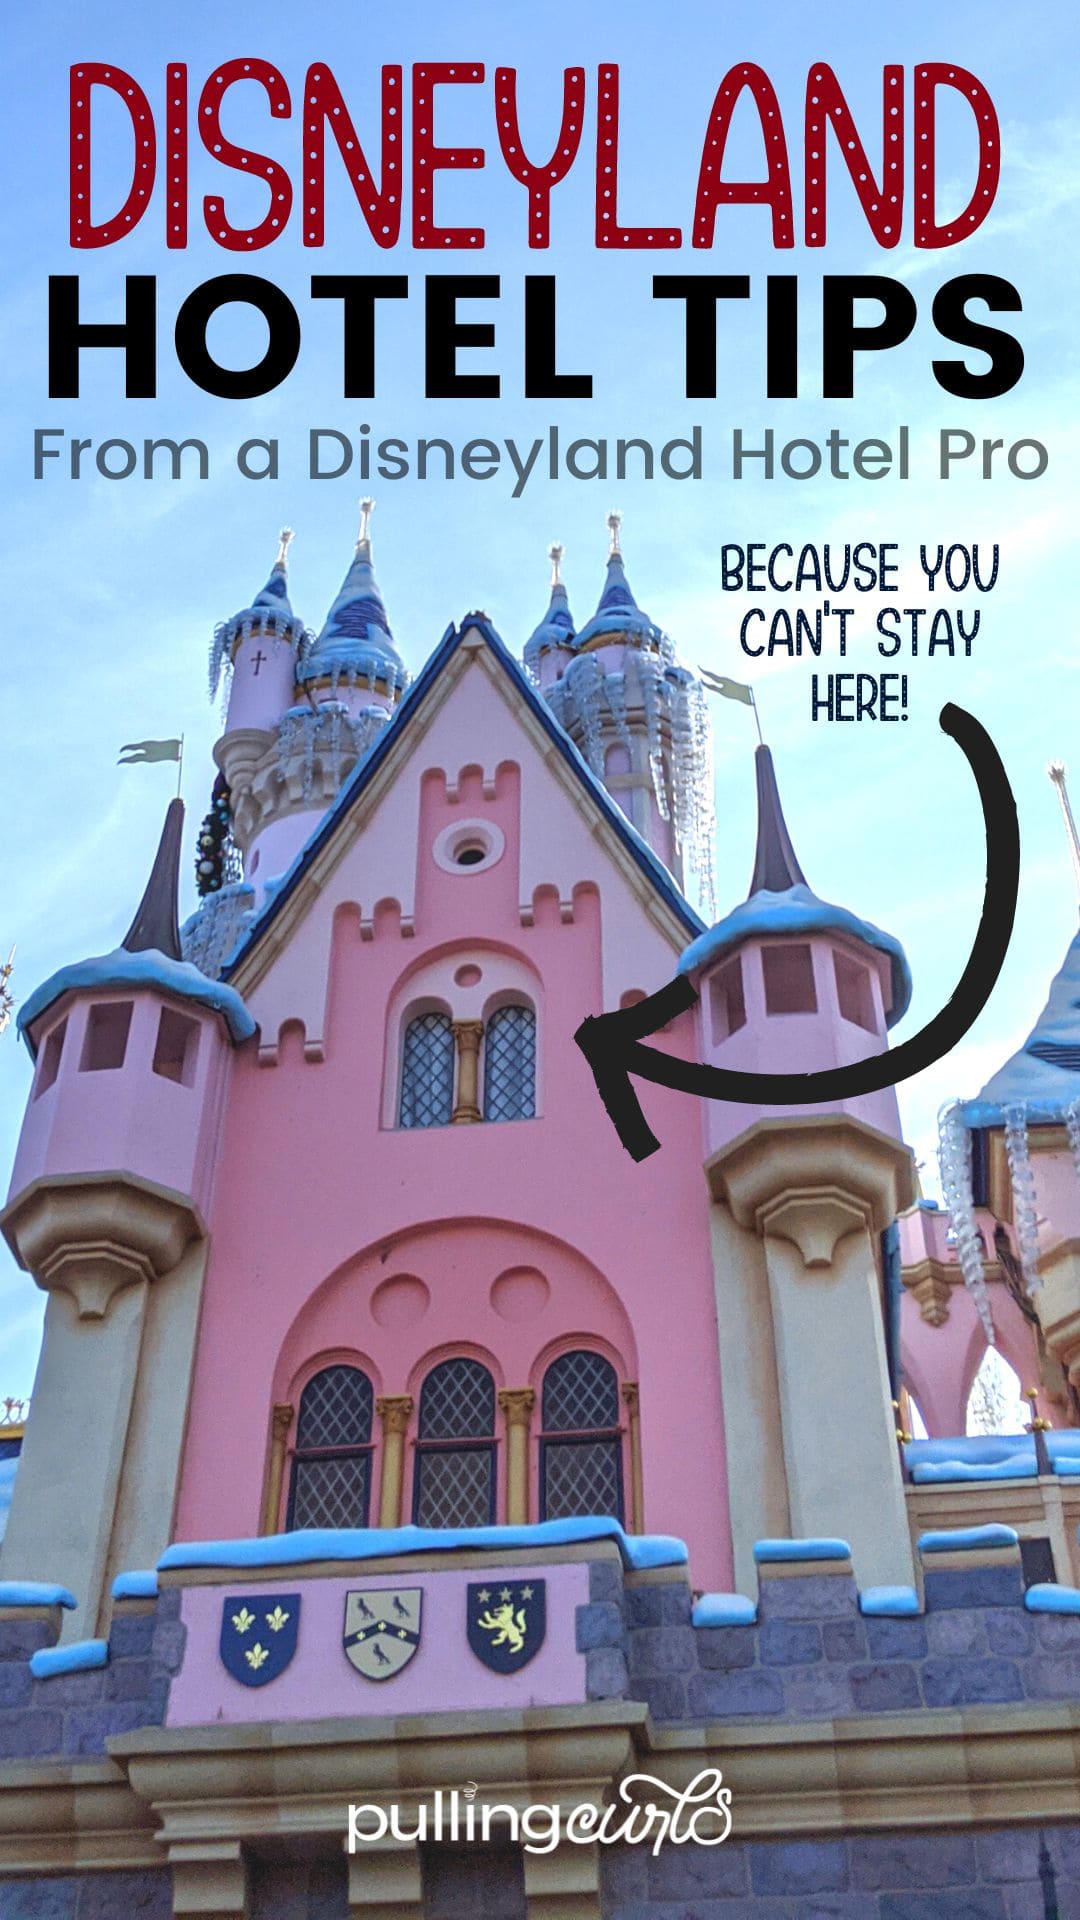 Are you planning a trip to Disneyland and looking for the best hotel tips? Look no further! I'm a seasoned Disney traveler and I'm spilling all my secrets on where to stay, what to do, and how to make the most of your time at the Happiest Place on Earth. via @pullingcurls